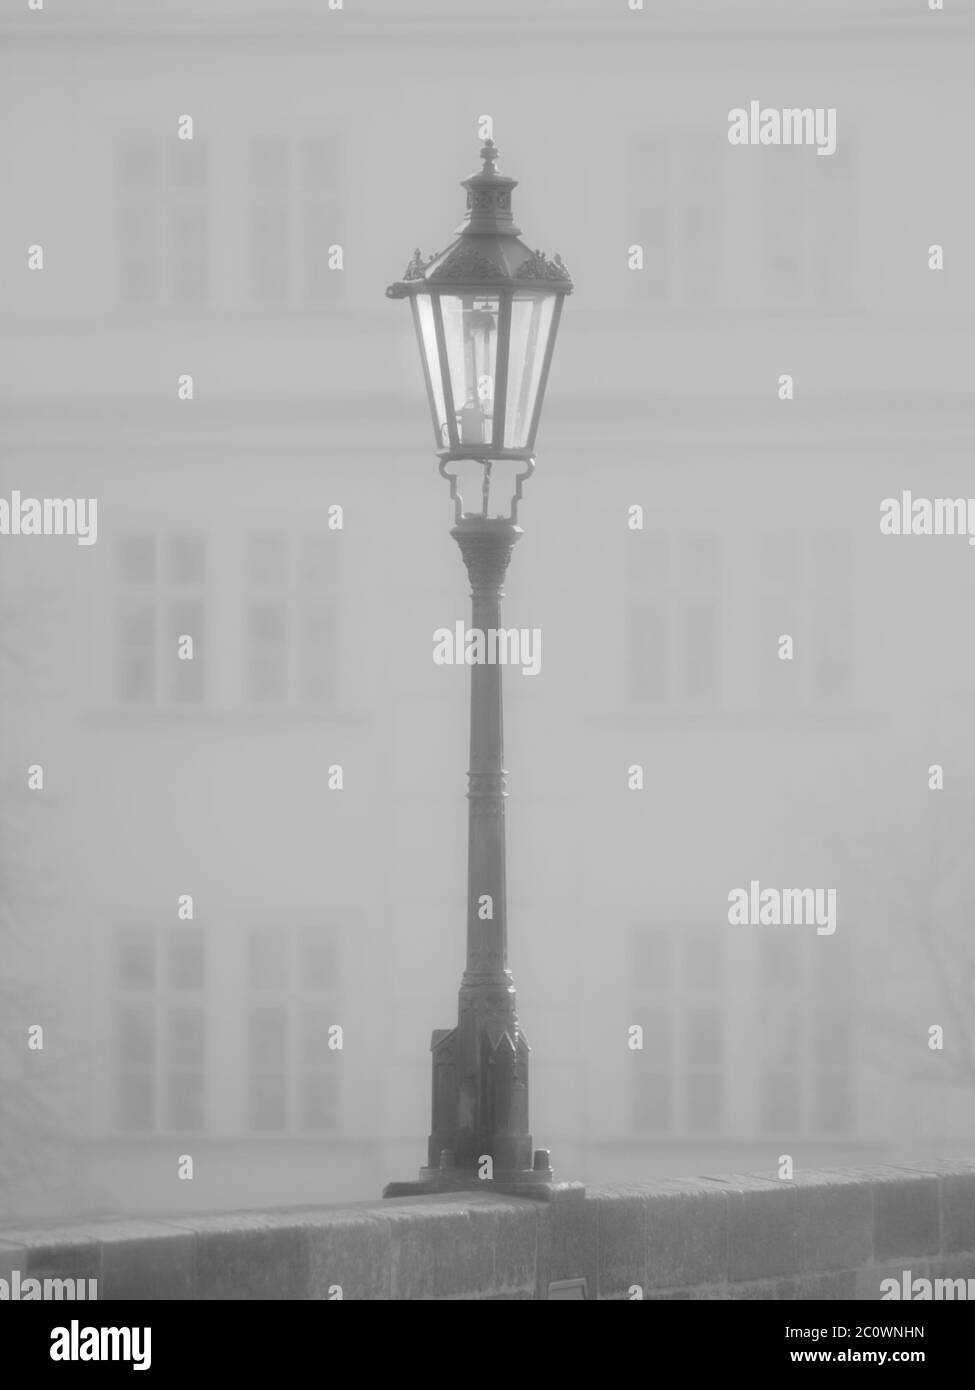 Old Gas Lamp, Free stock photos - Rgbstock - Free stock images, vierdrie